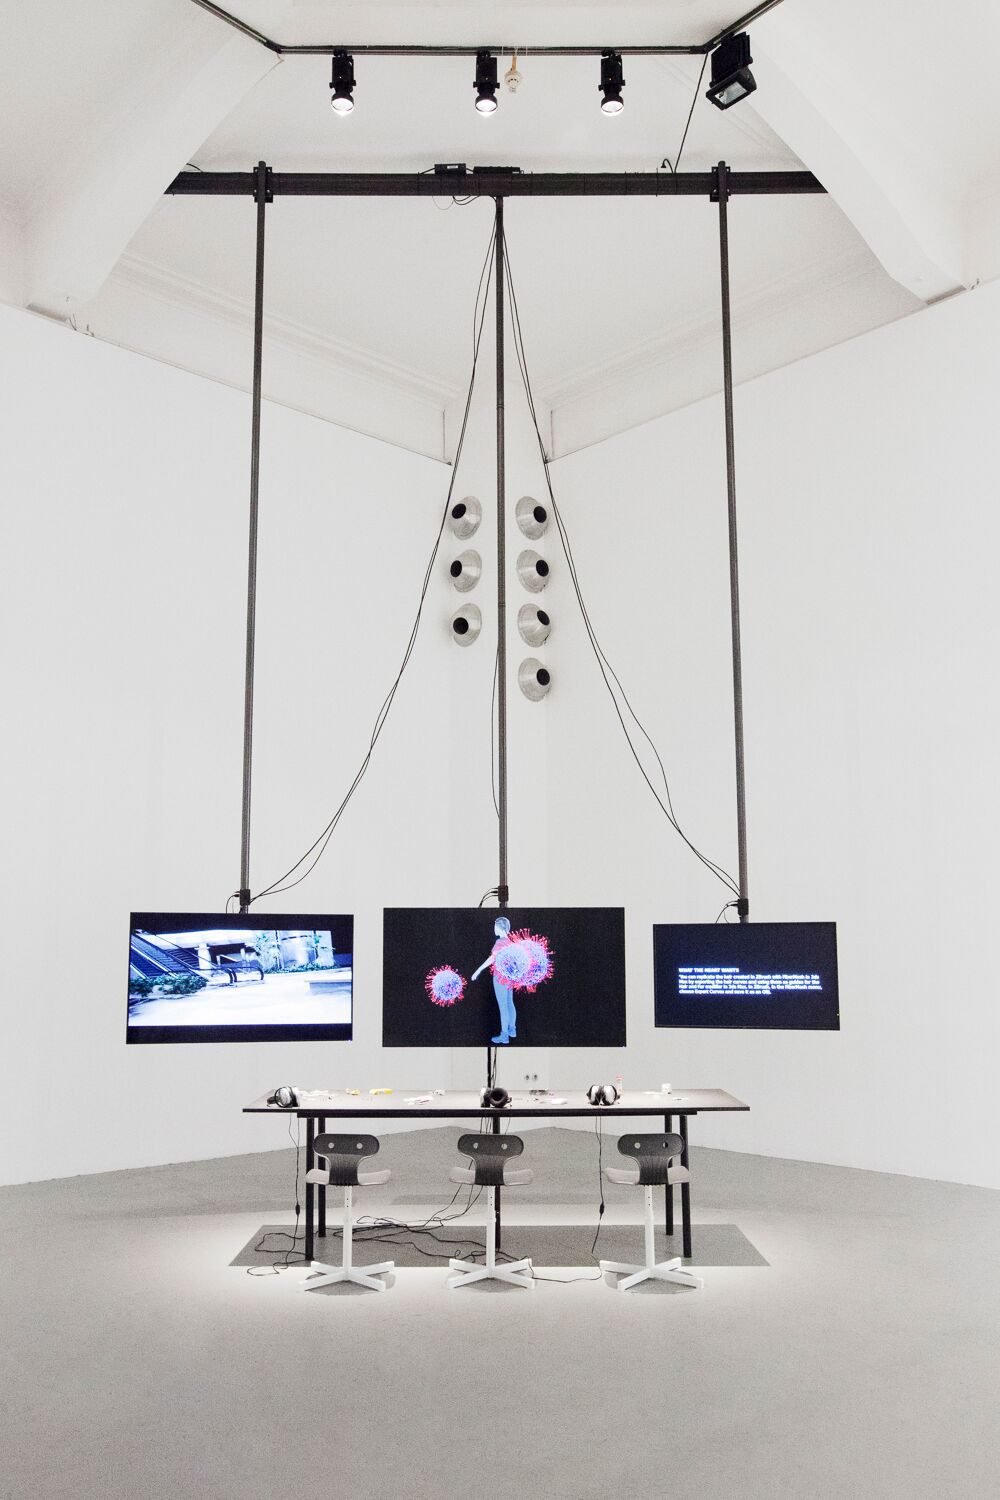 Cécile B. EvansWorking on What the Heart Wants, 20163 screen livestream installation, Raspberry Pis, HD files, streaming program, ethernet cables, table chairs and different items of the artist